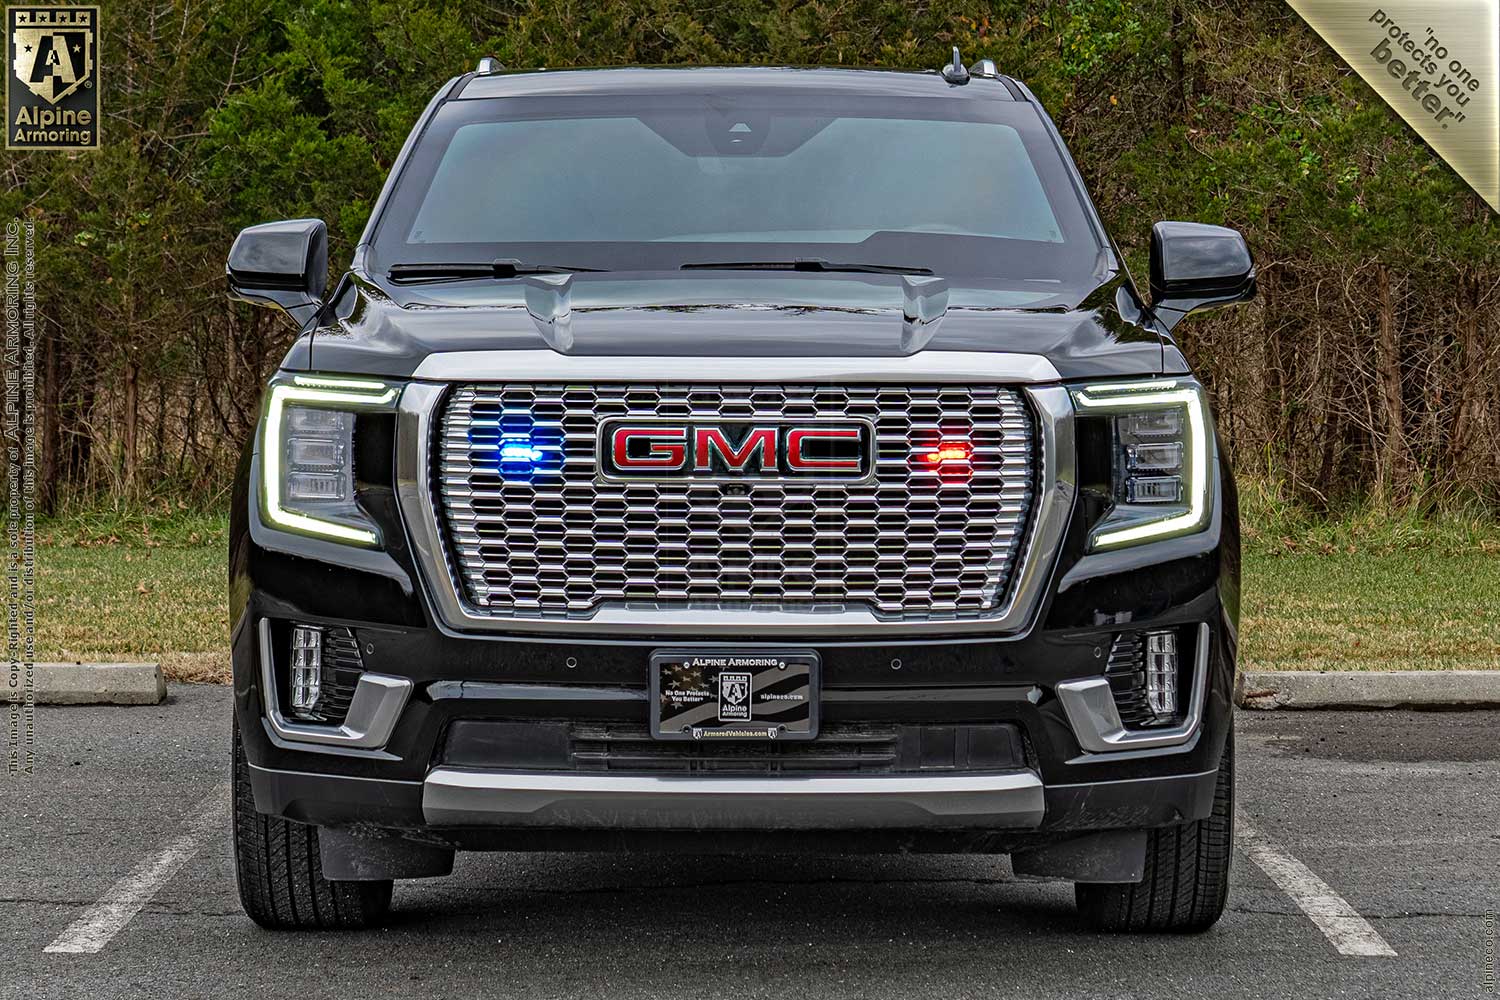 New Inventory armored GMC Yukon 4WD Denali Level A9/B6+ Exterior & Interior Images VIN:9835